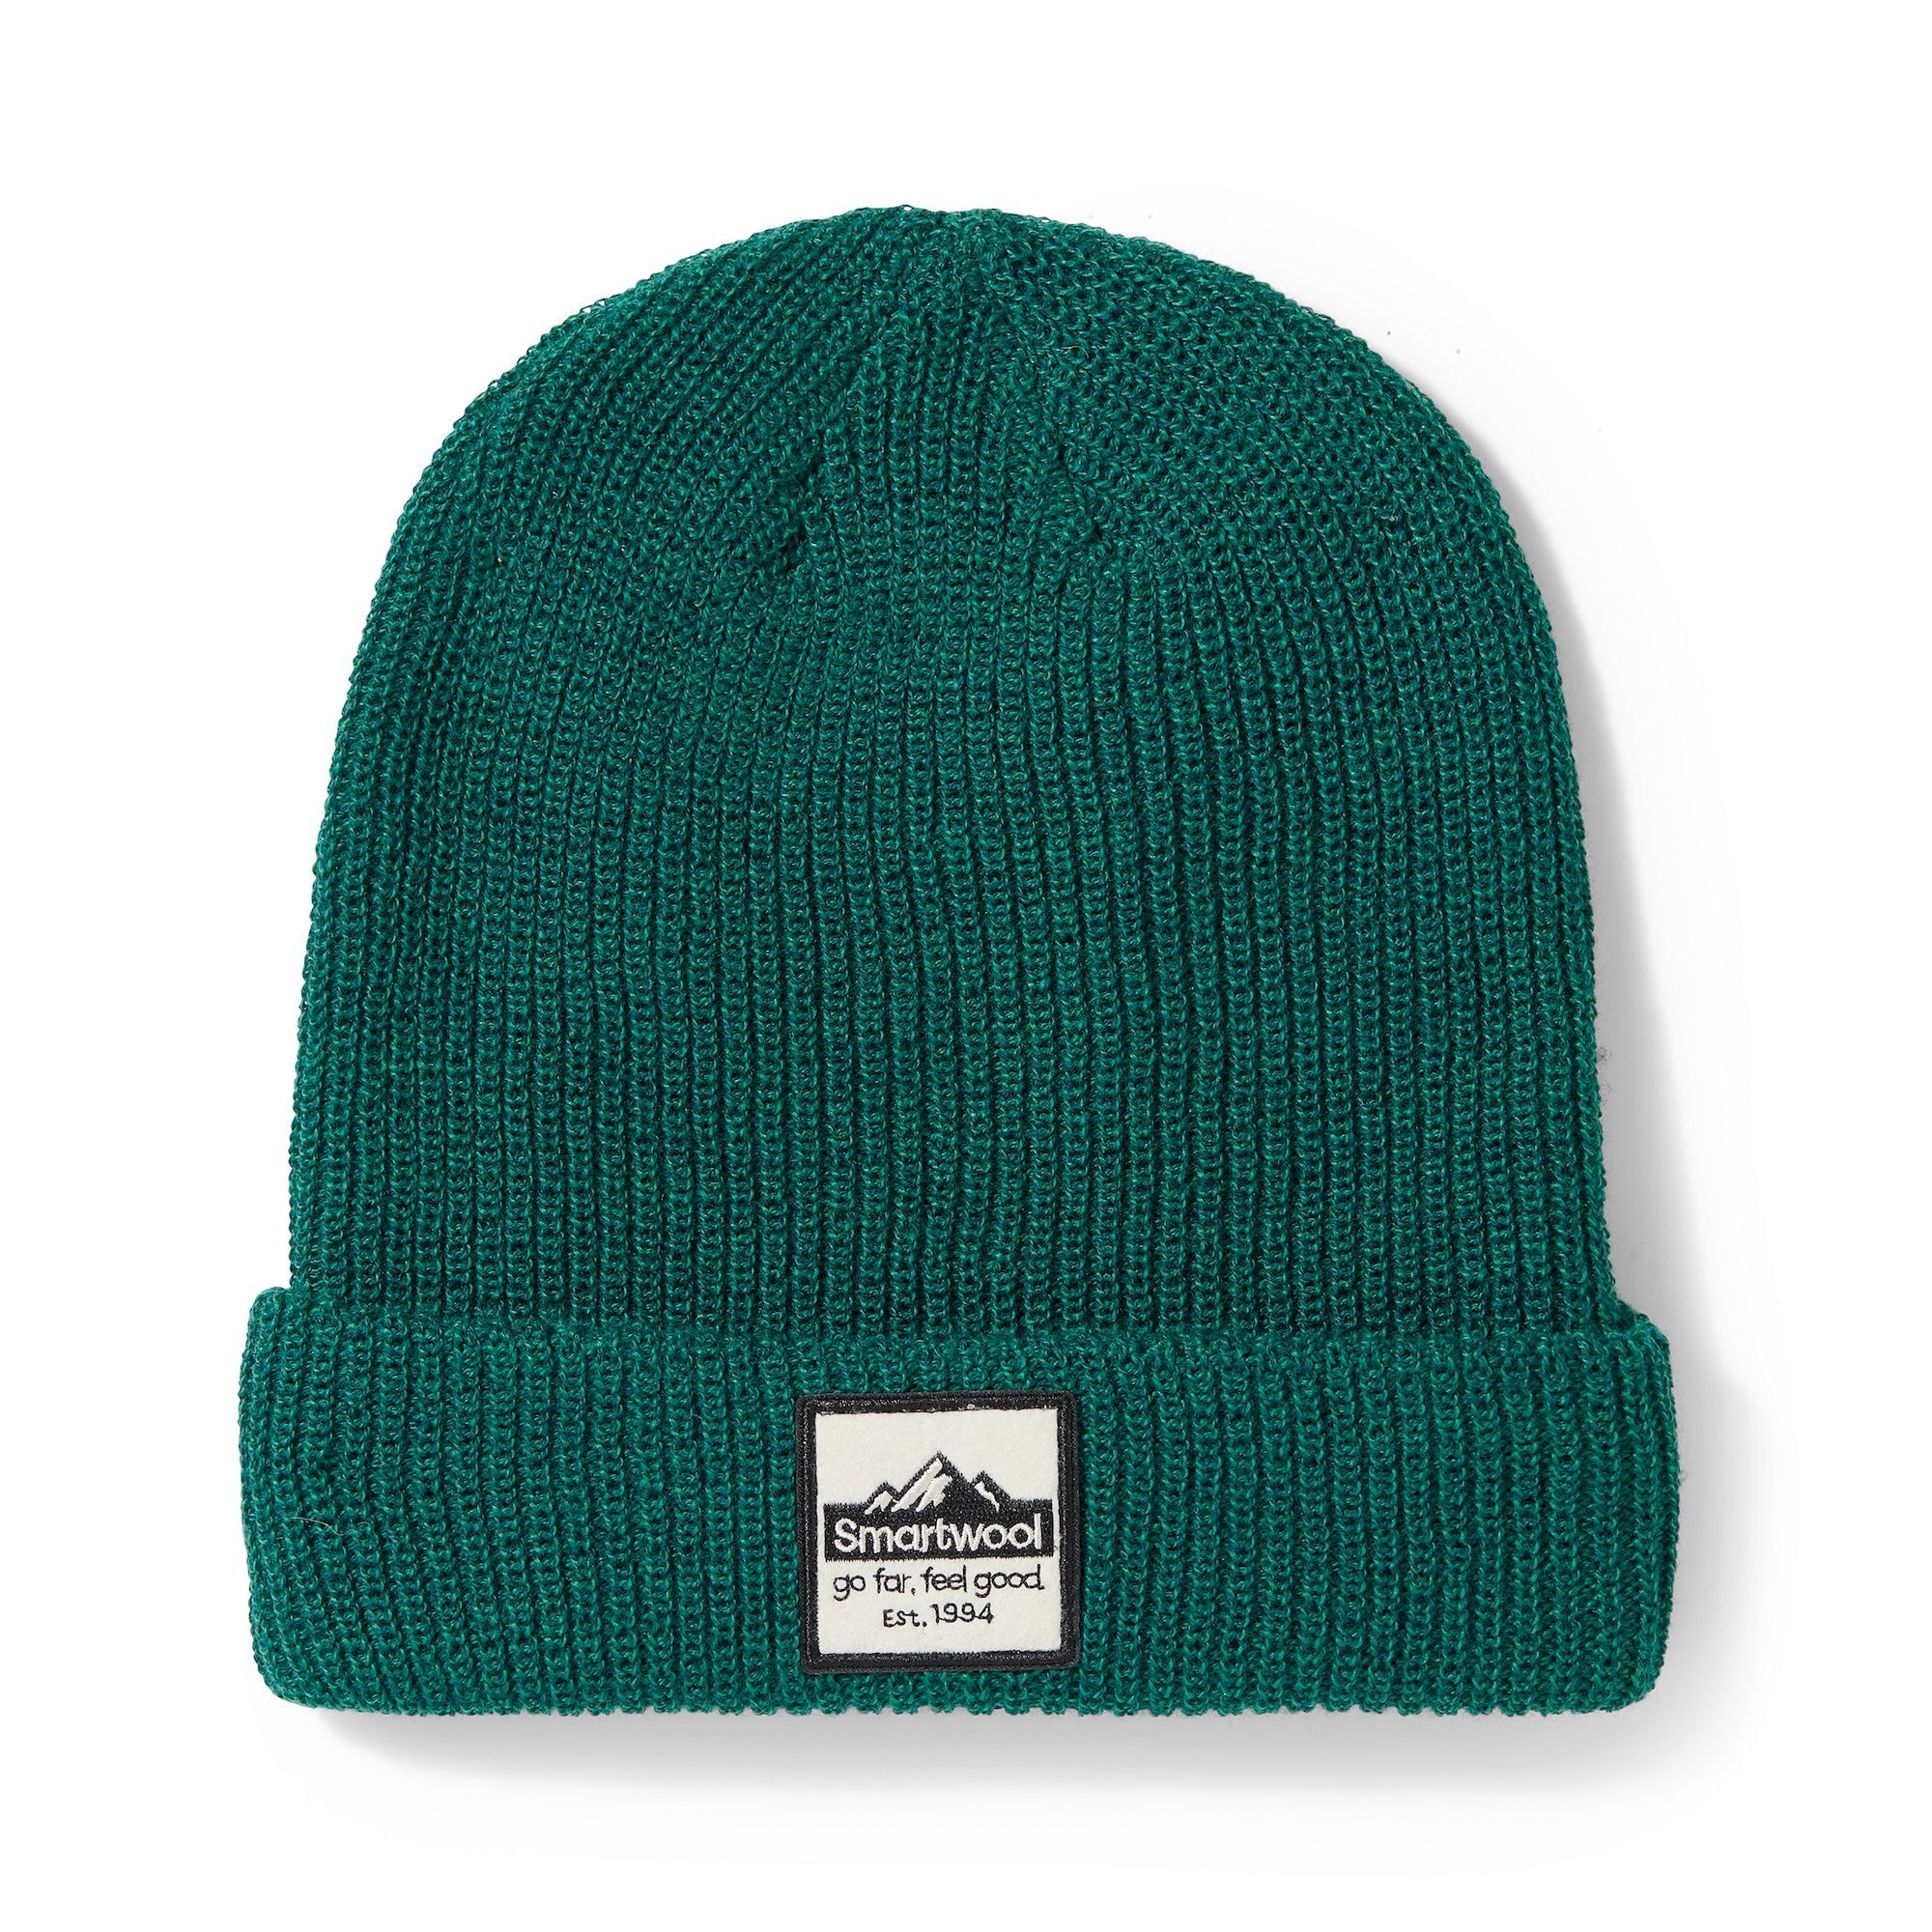 Smartwool Smartwool Patch Beanie - Hue